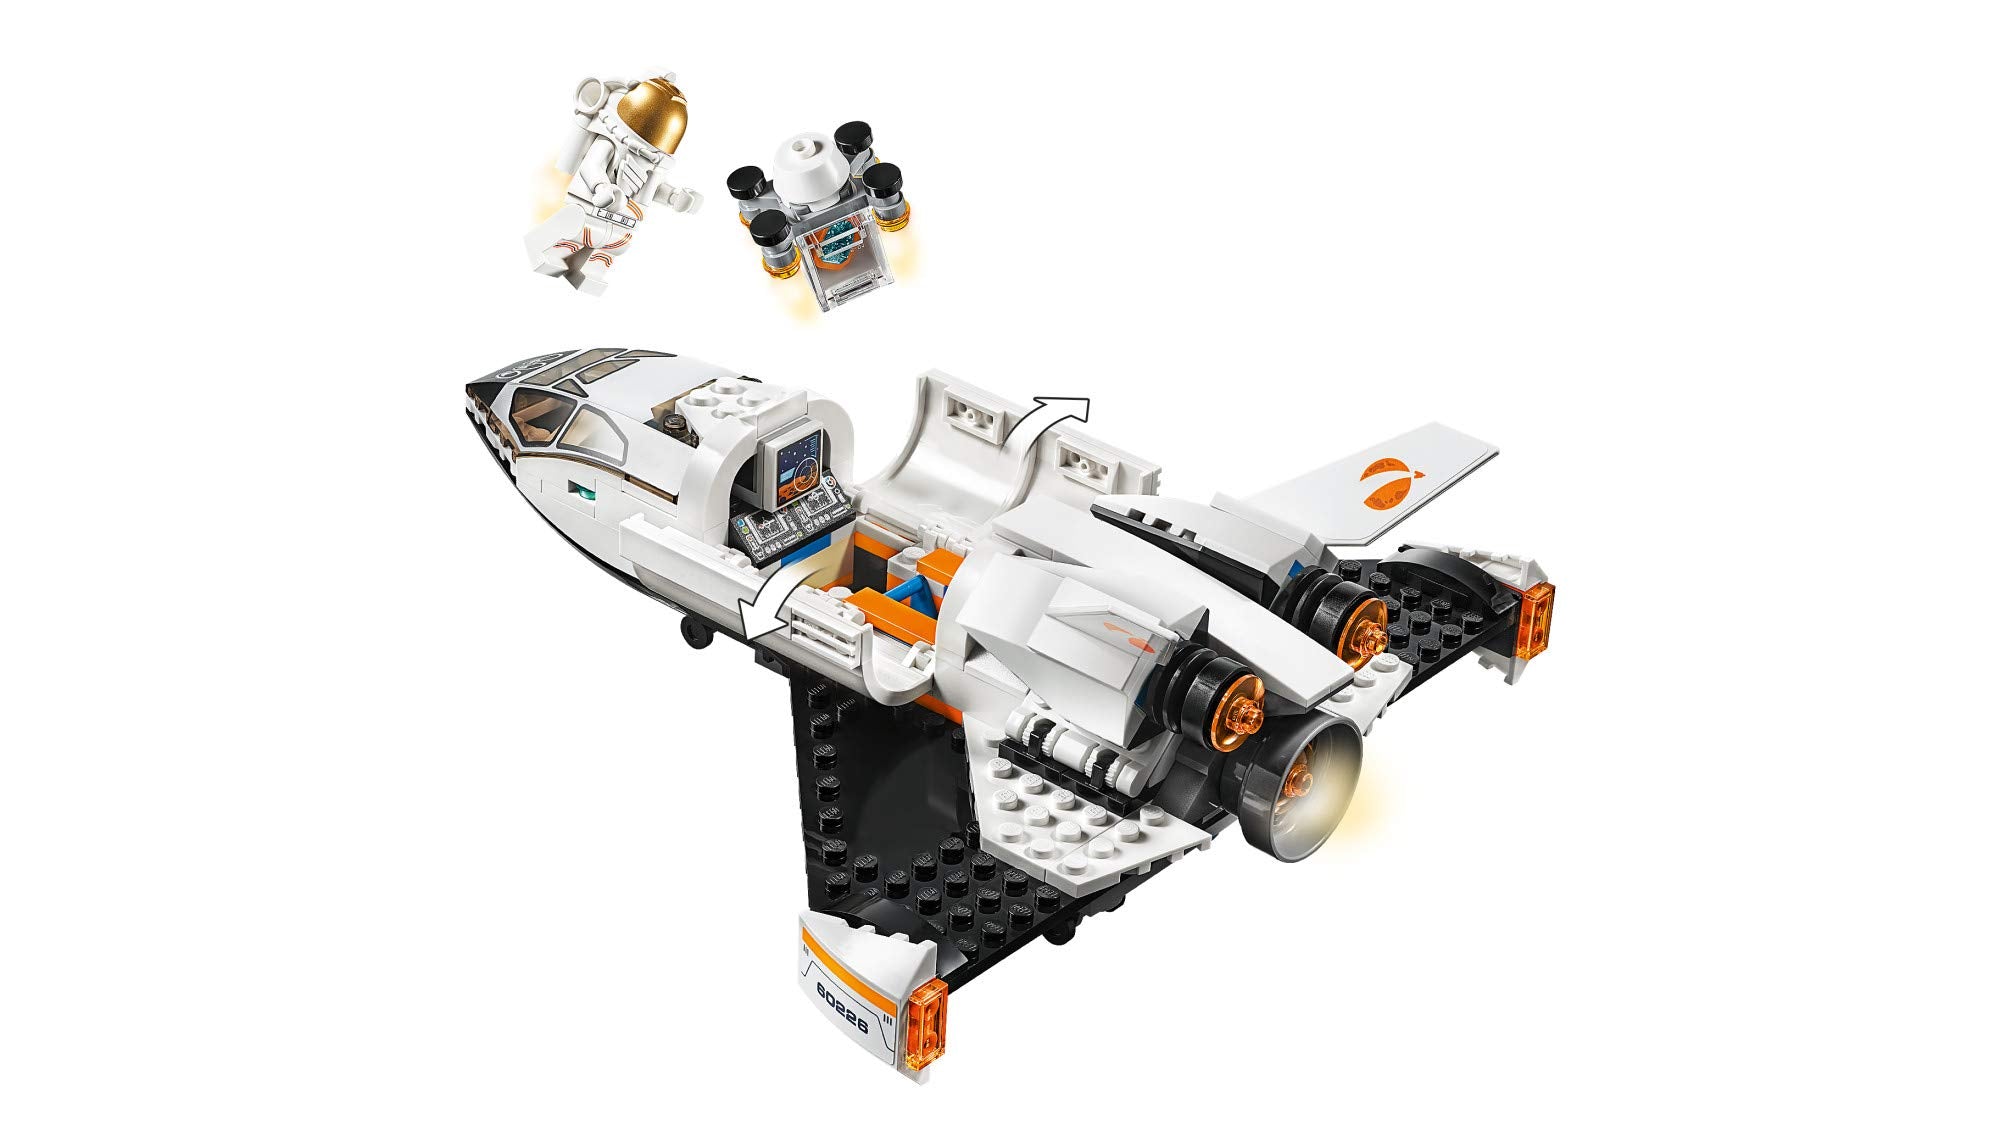 LEGO City Space Mars Research Shuttle 60226 Space Shuttle Toy Building Kit with Mars Rover and Astronaut Minifigures, Top STEM Toy for Boys and Girls (273 Pieces) (7591679688942)